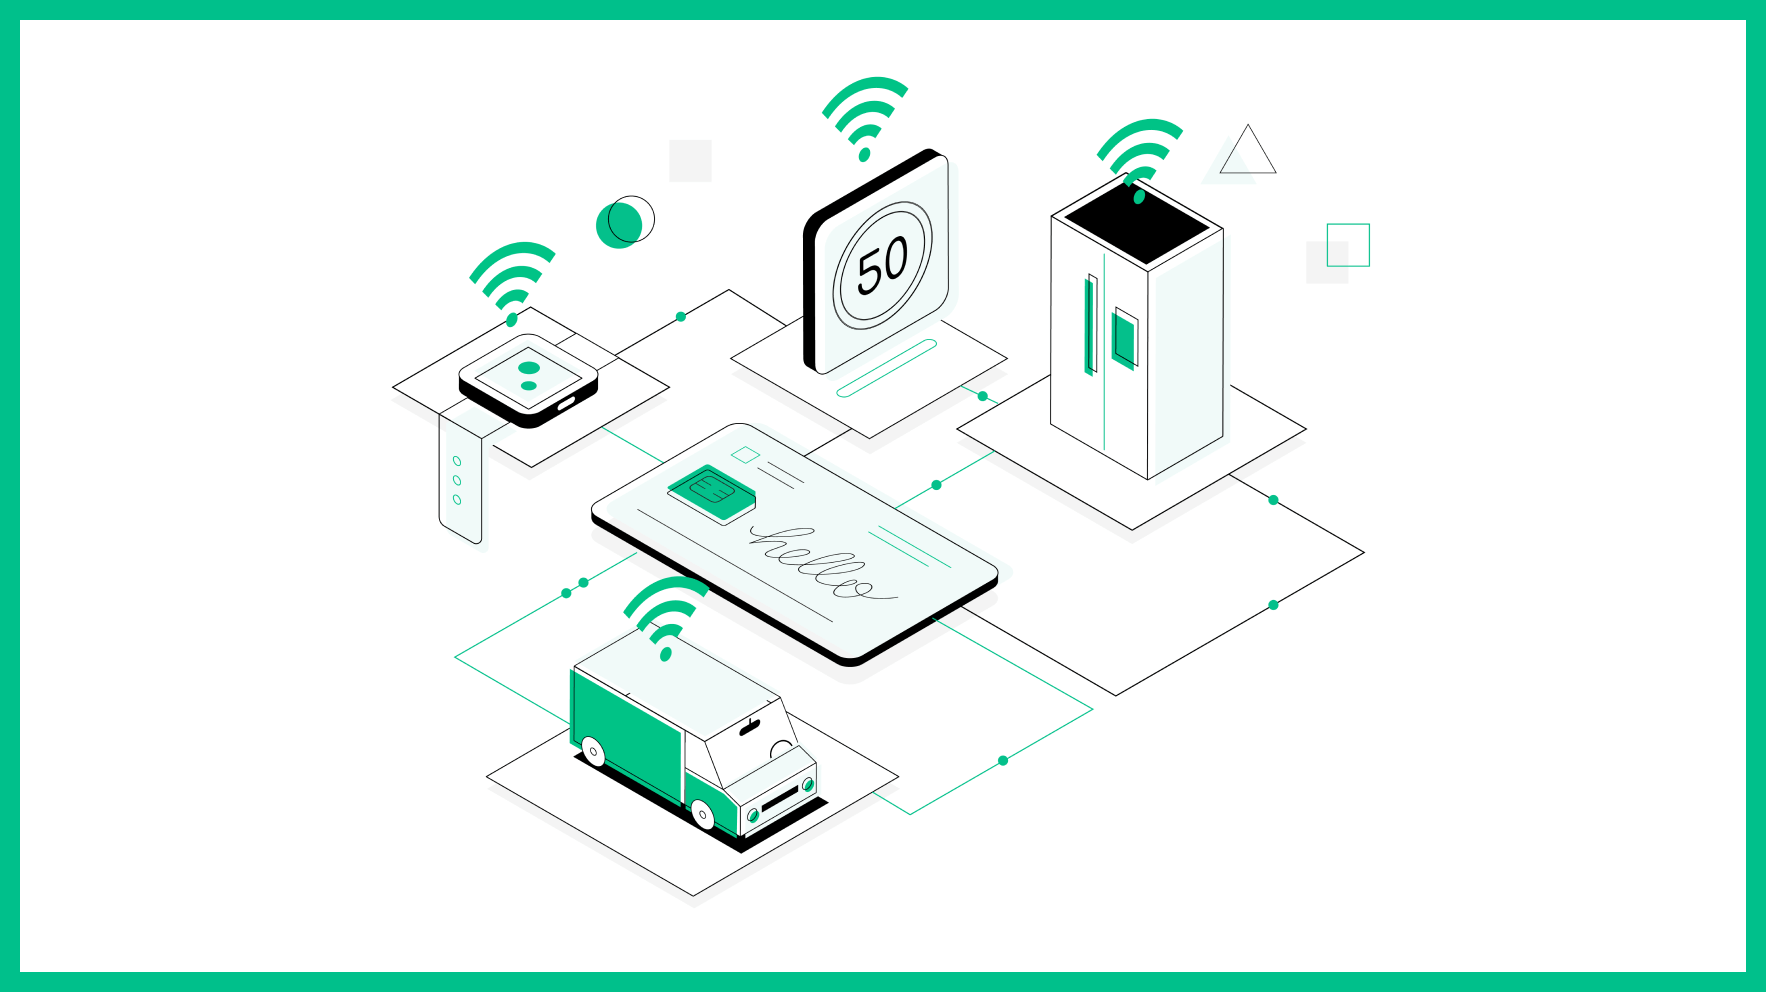 Build and scale IoT products globally with ease.